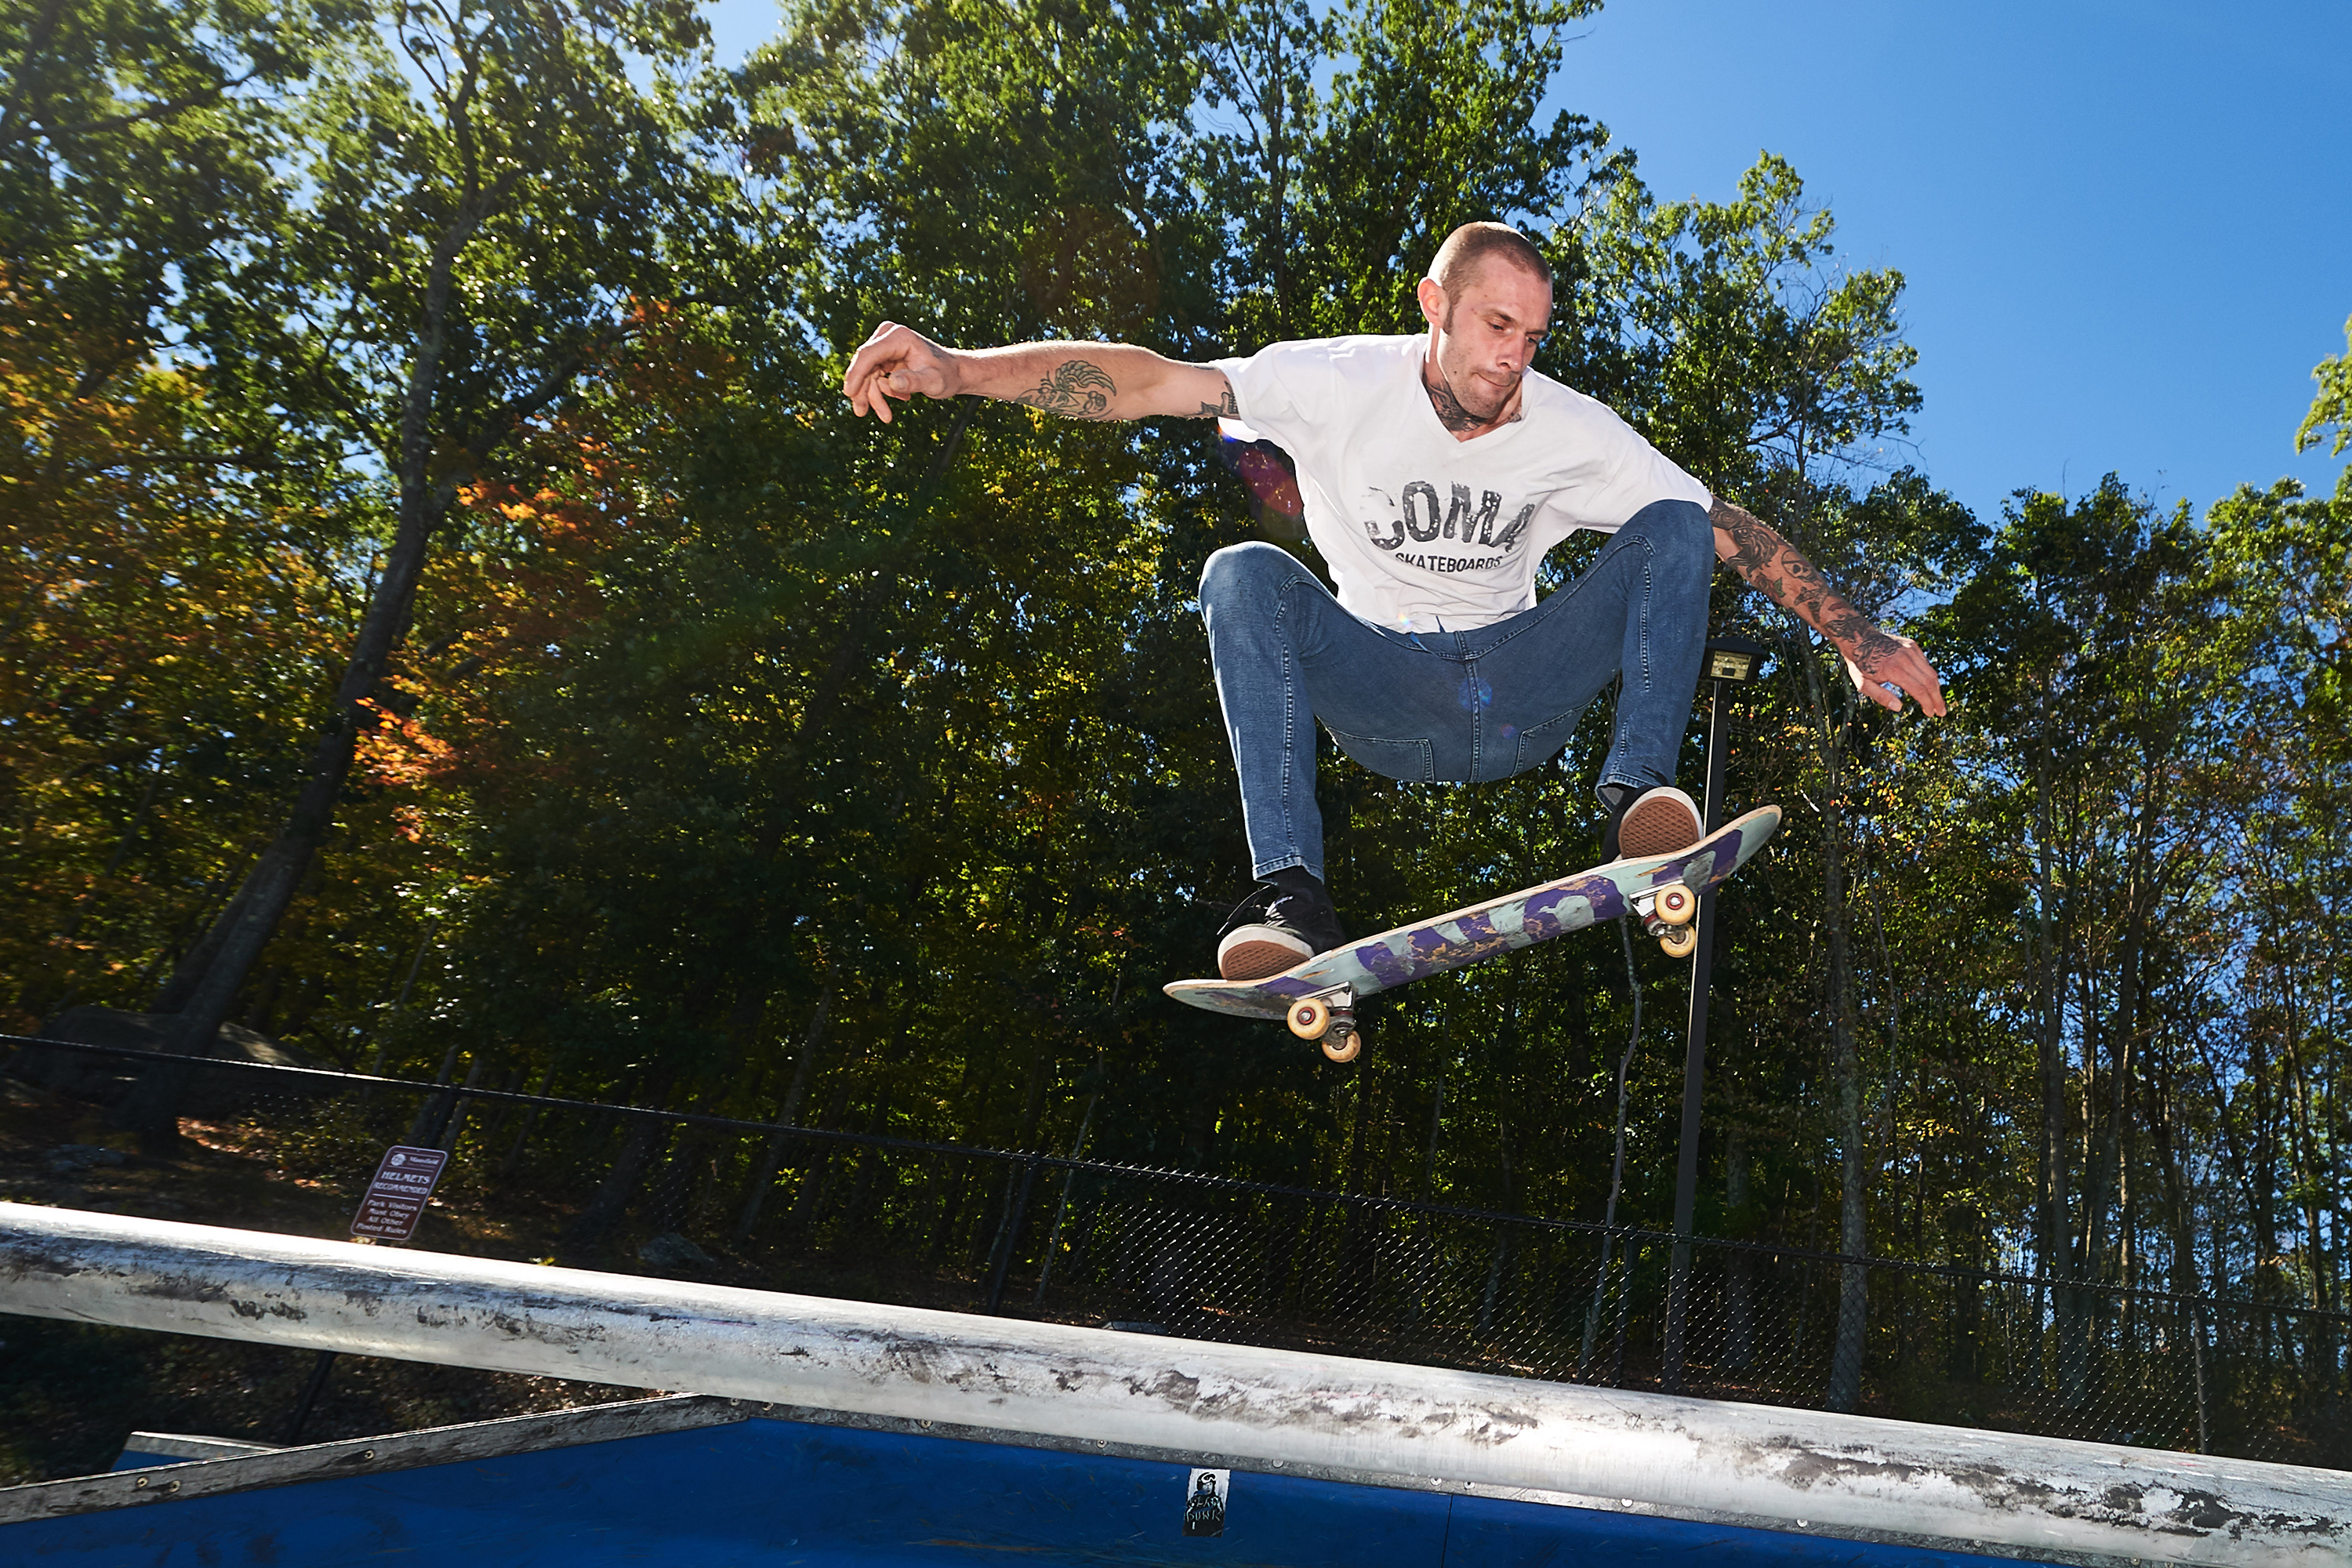 Bent Cordy rides one of his COMA skateboards at the Mansfield Skate Park on Sept. 25, 2016. (Peter Morenus/UConn Photo)